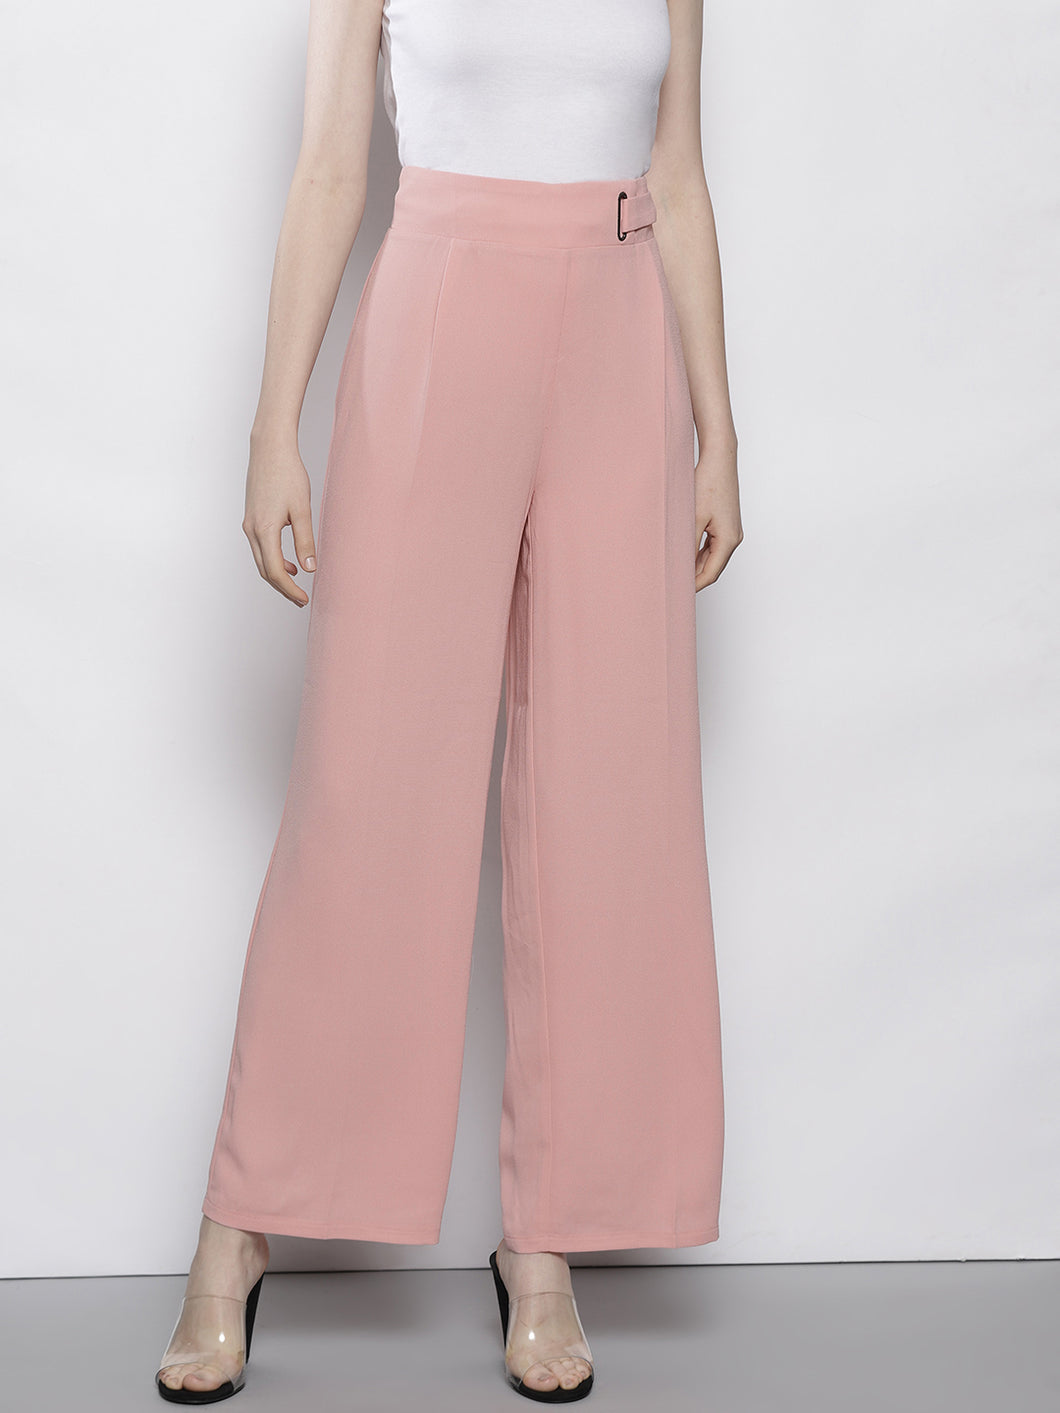 Pink Regular Fit Solid Parallel Trousers